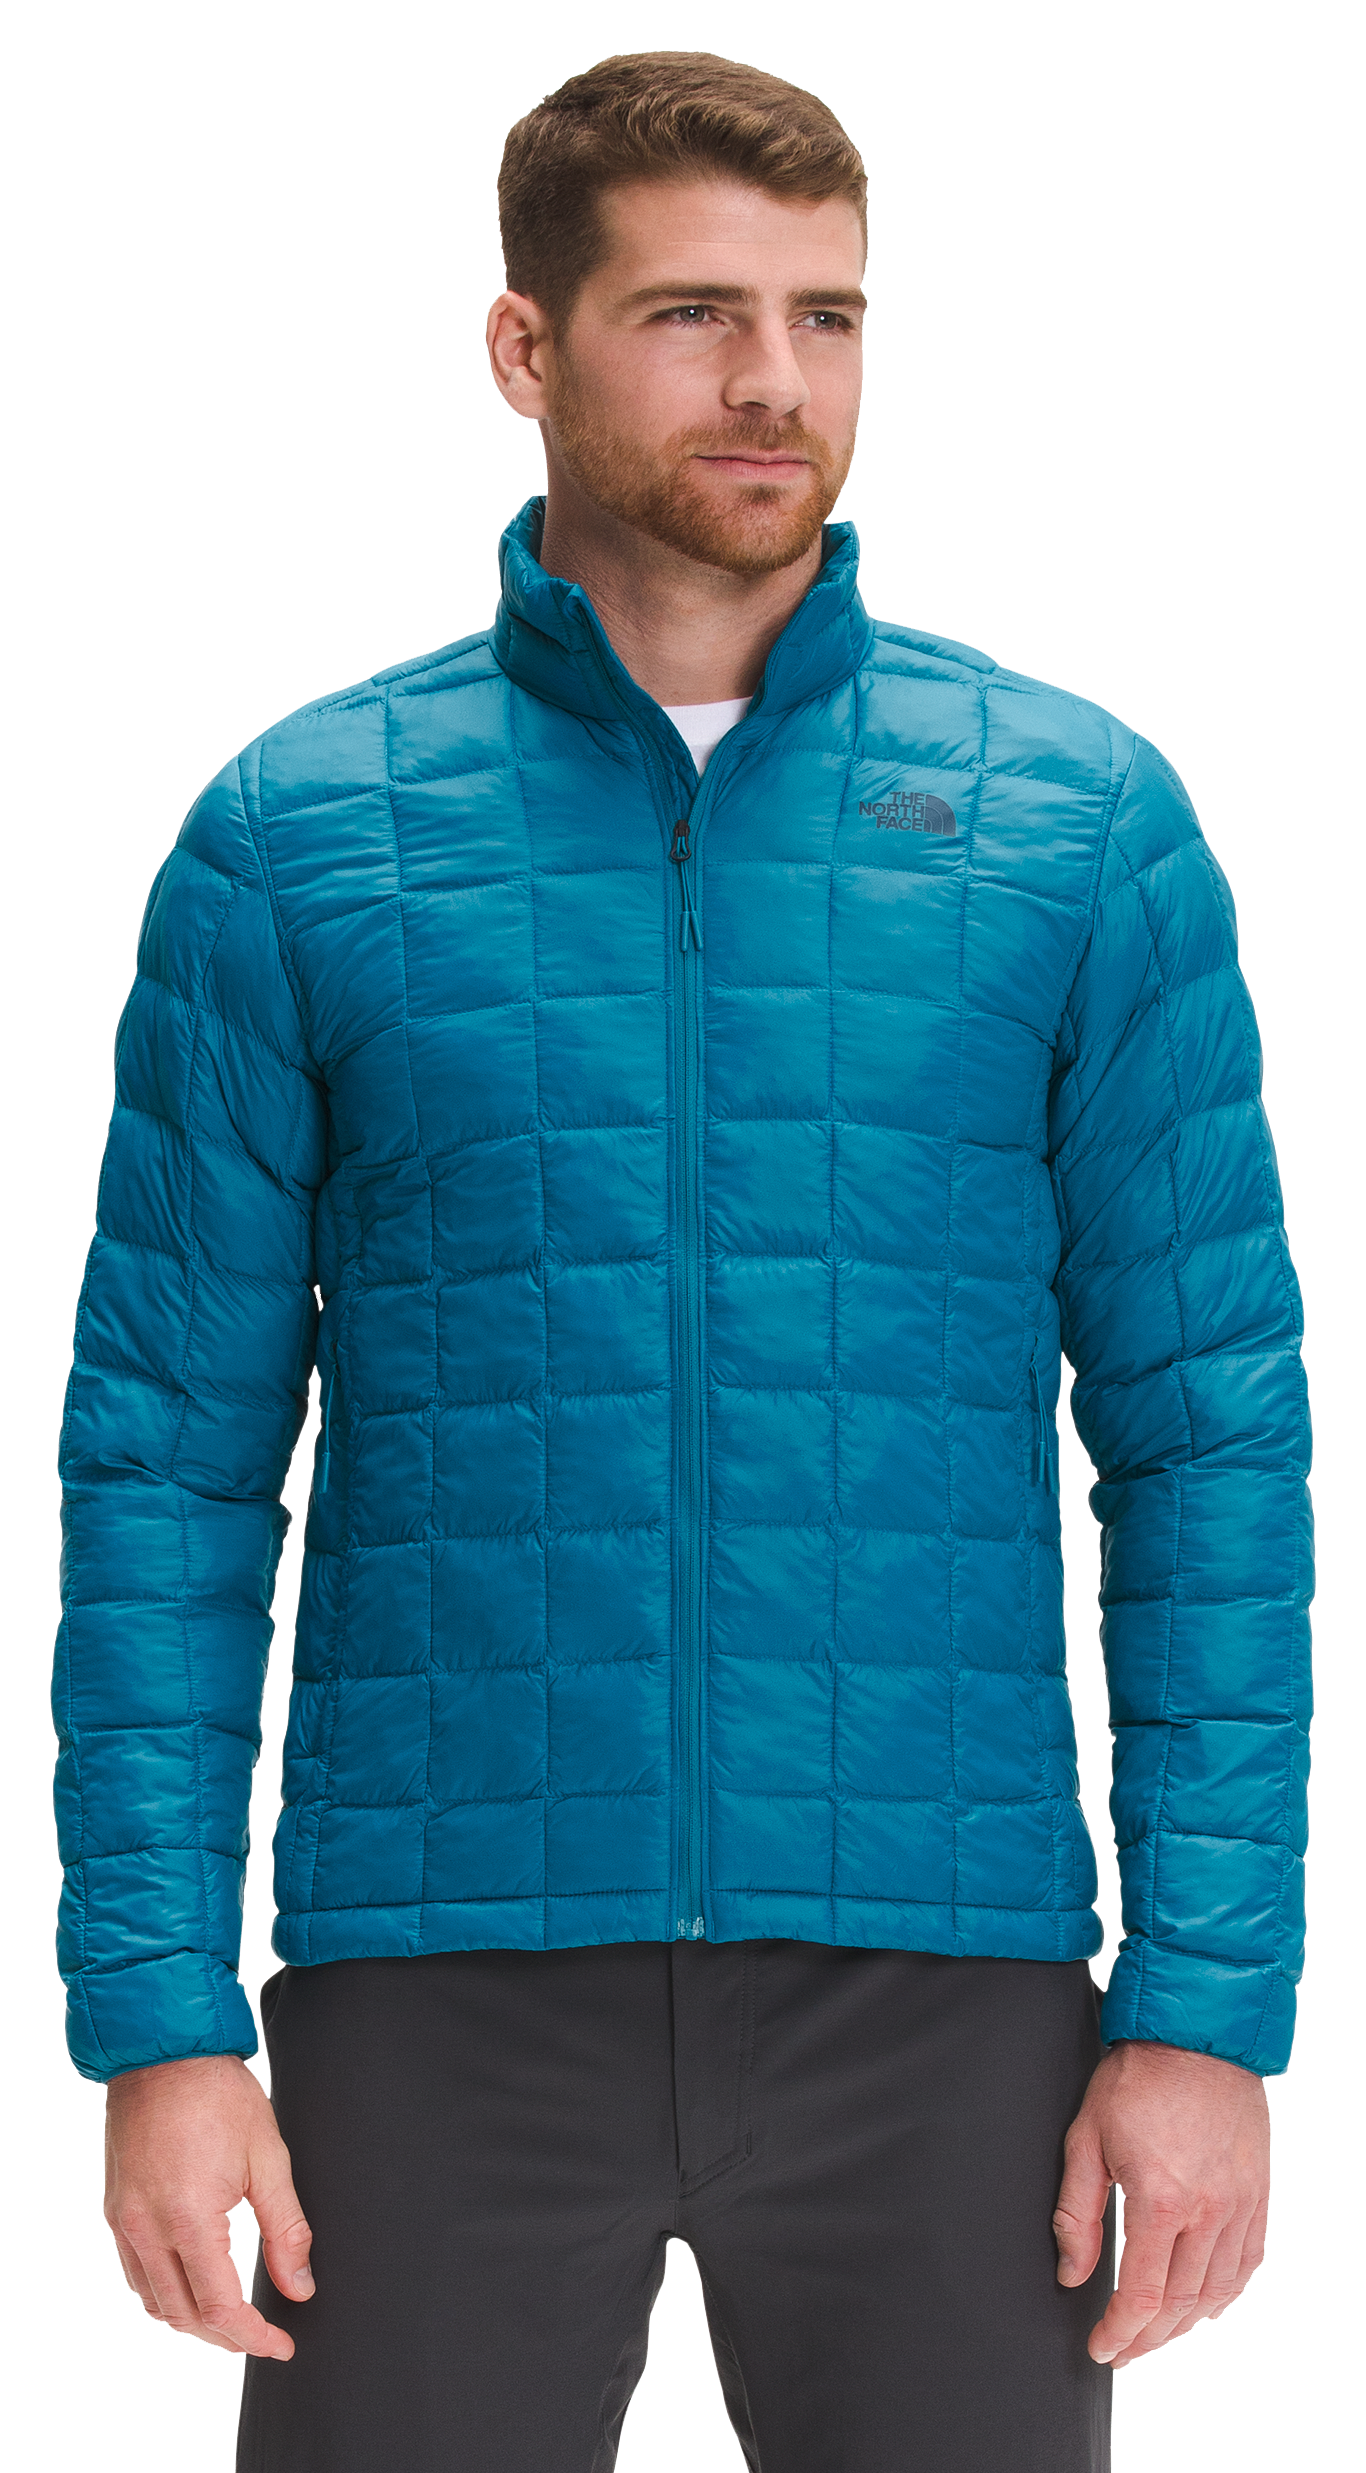 The North Face ThermoBall Eco Quilted Jacket for Men - Banff Blue - 3XL